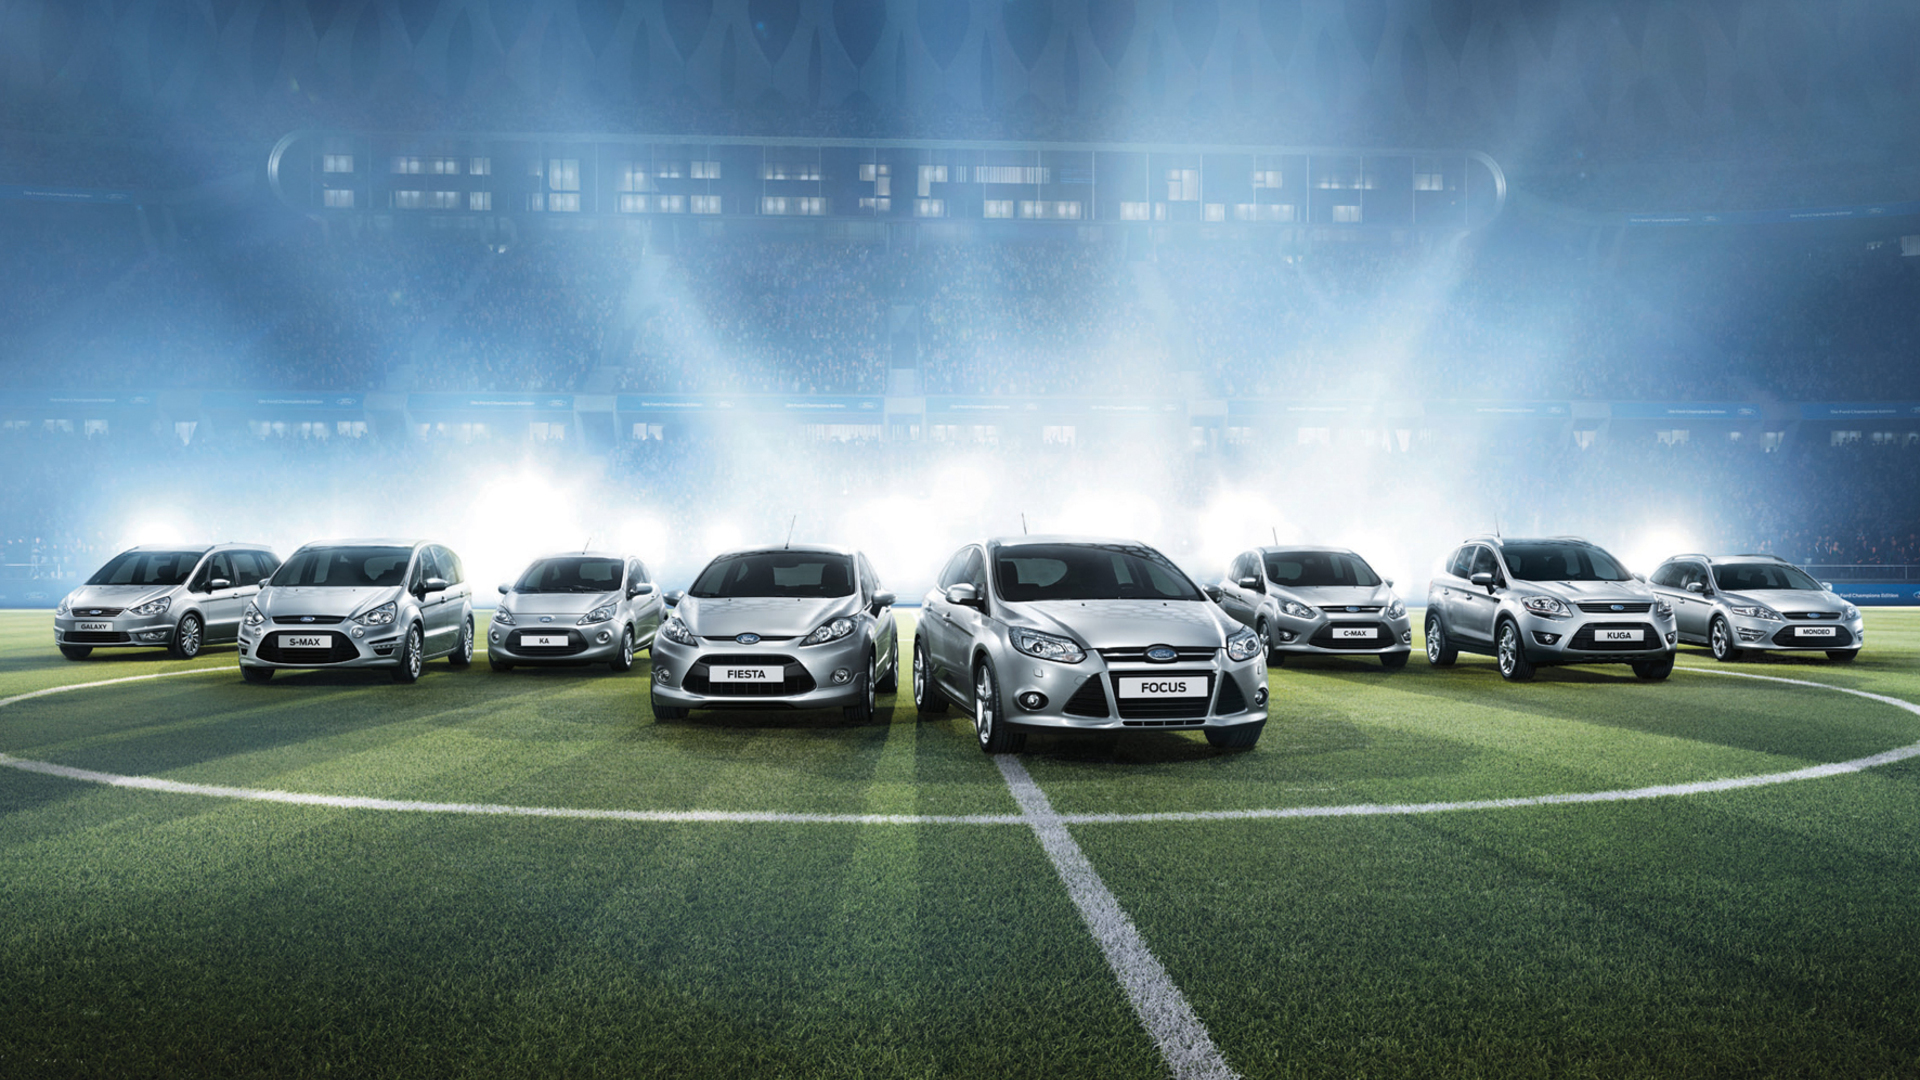 Ford And Uefa Champions League Full HD Wallpaper Cars